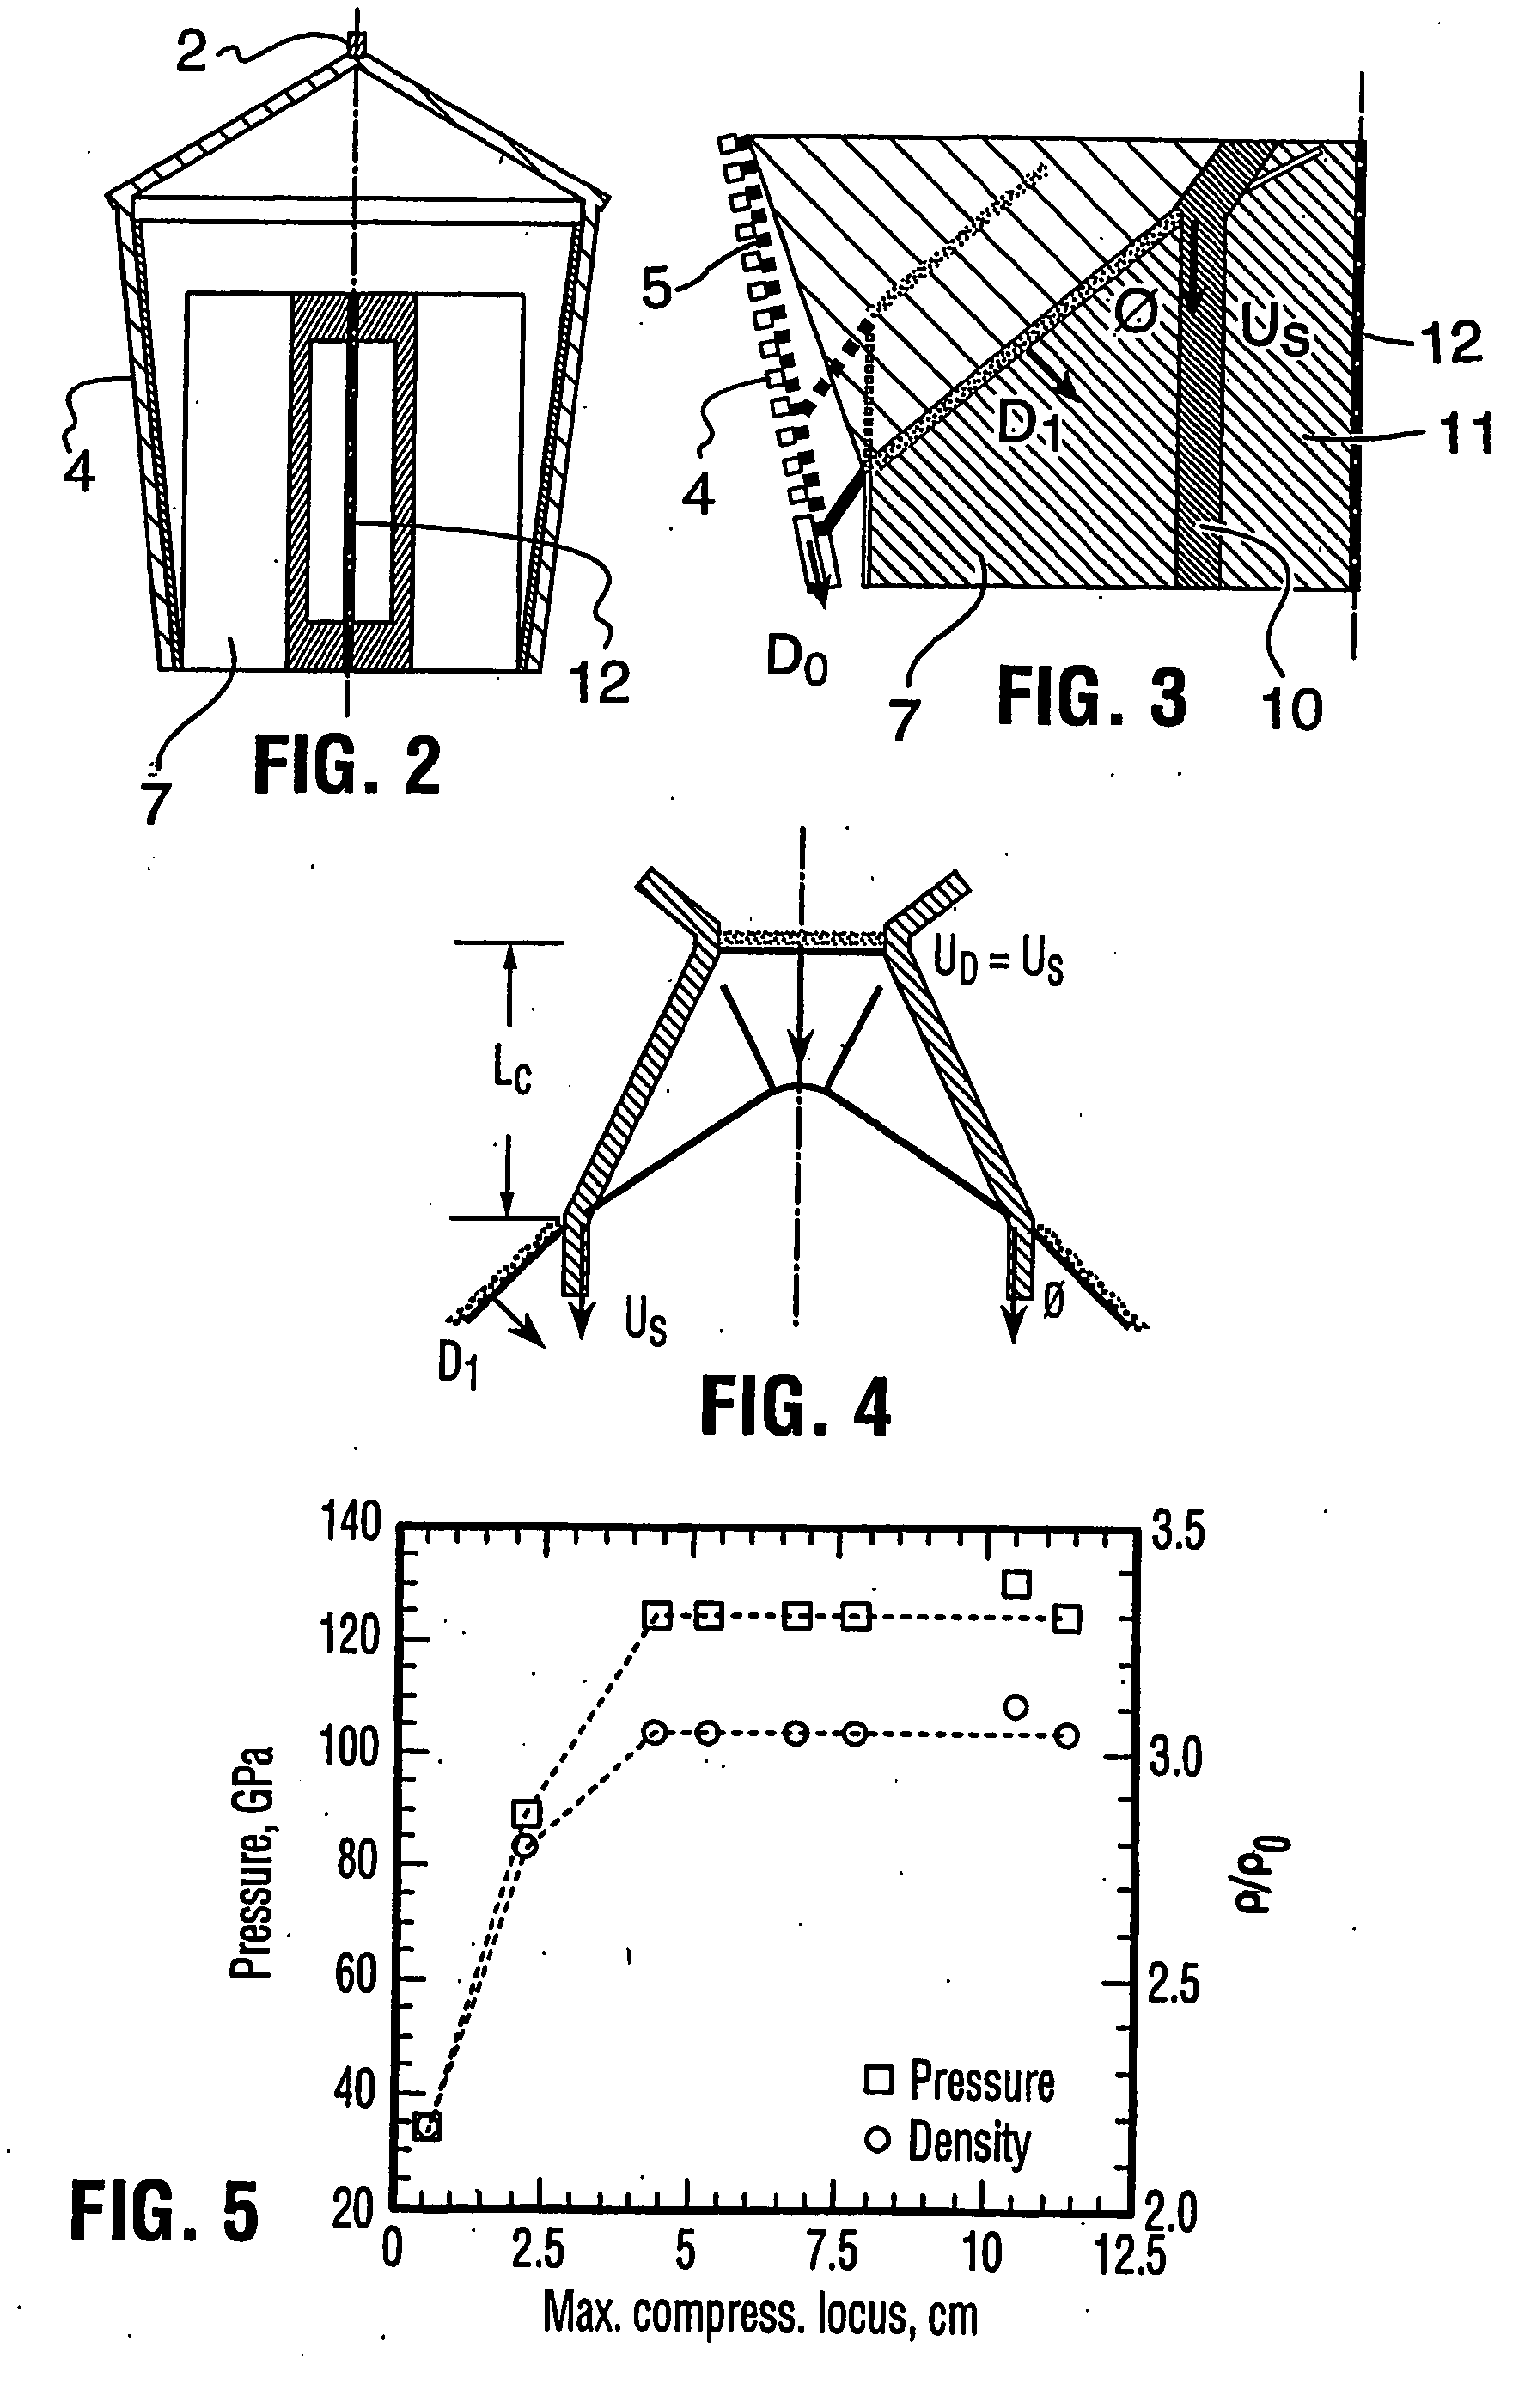 Super compressed detonation method and device to effect such detonation